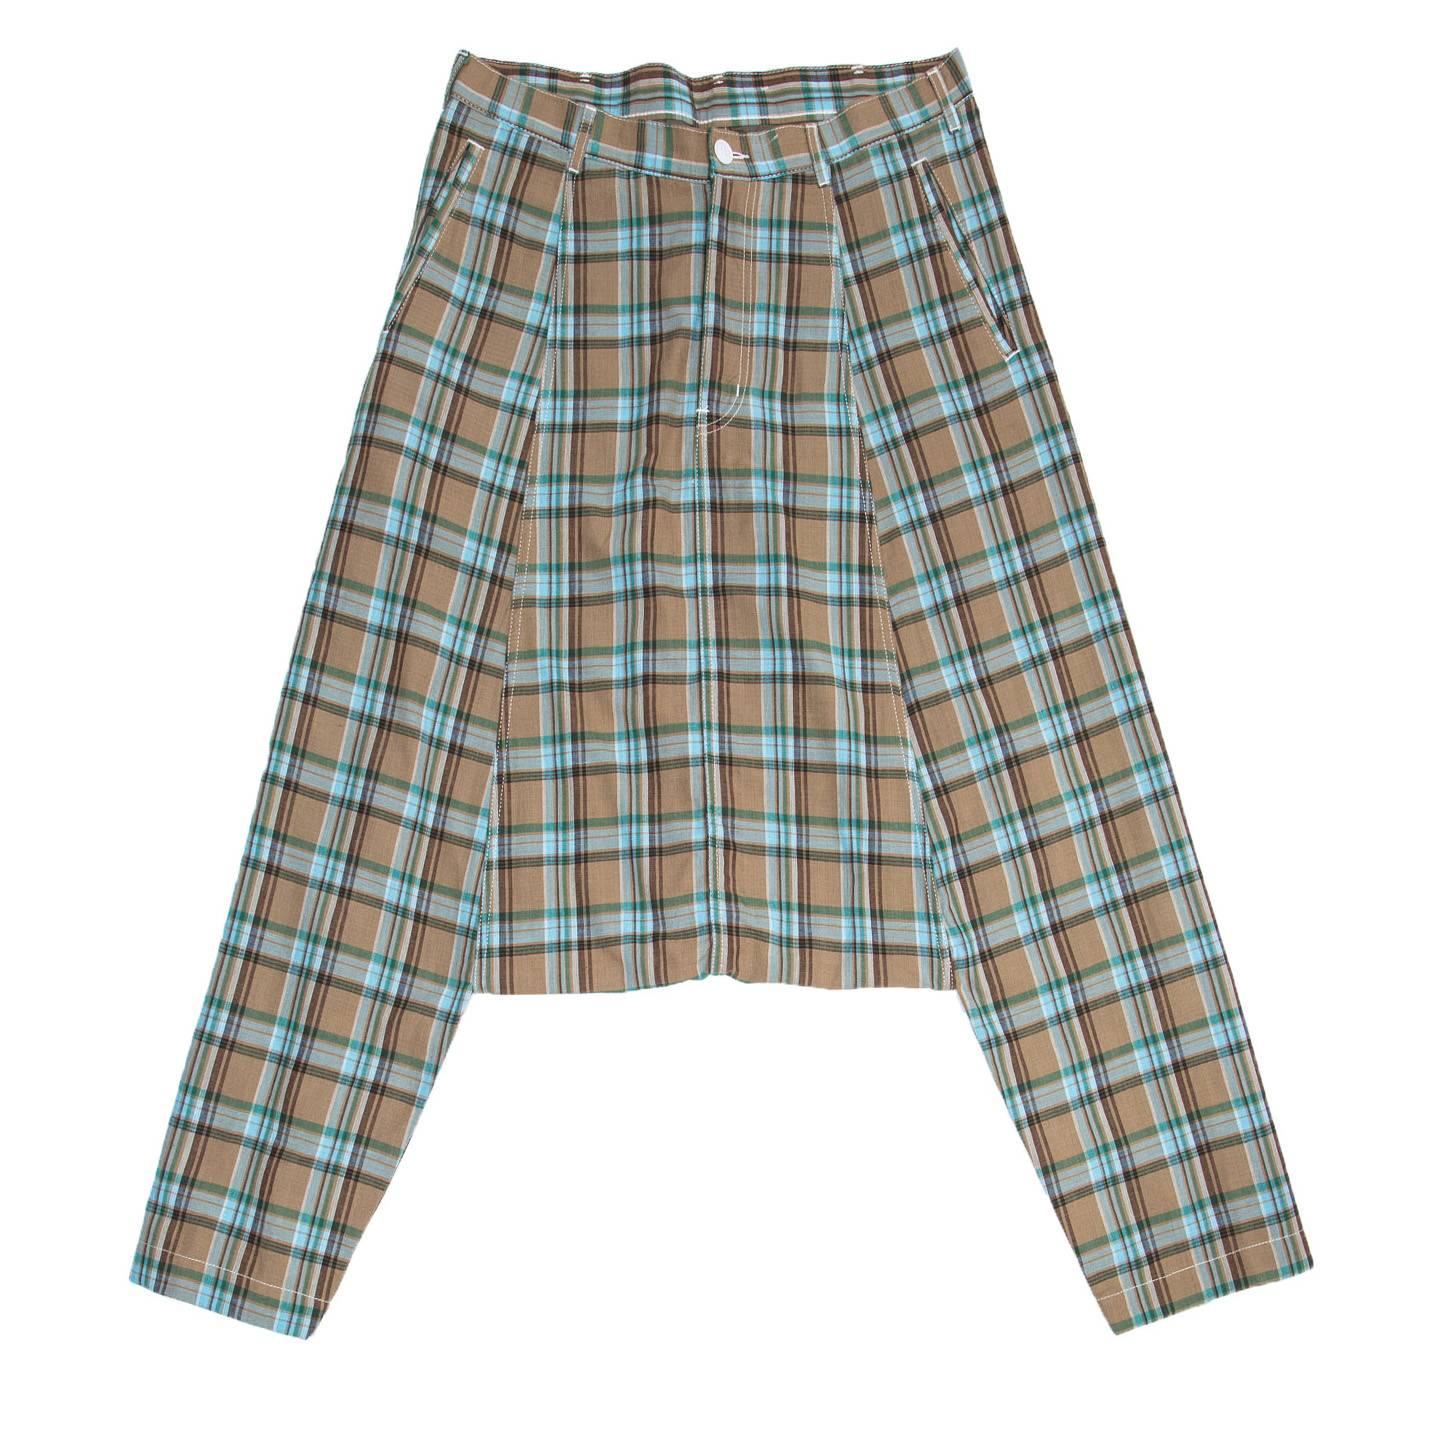 Brown, green and baby blue cotton plaid harem style long pants with very low crotch to below knees. The front pockets are classic slit style while at the back the patch pockets are round and wide. All the seams are enriched by white top stitches to